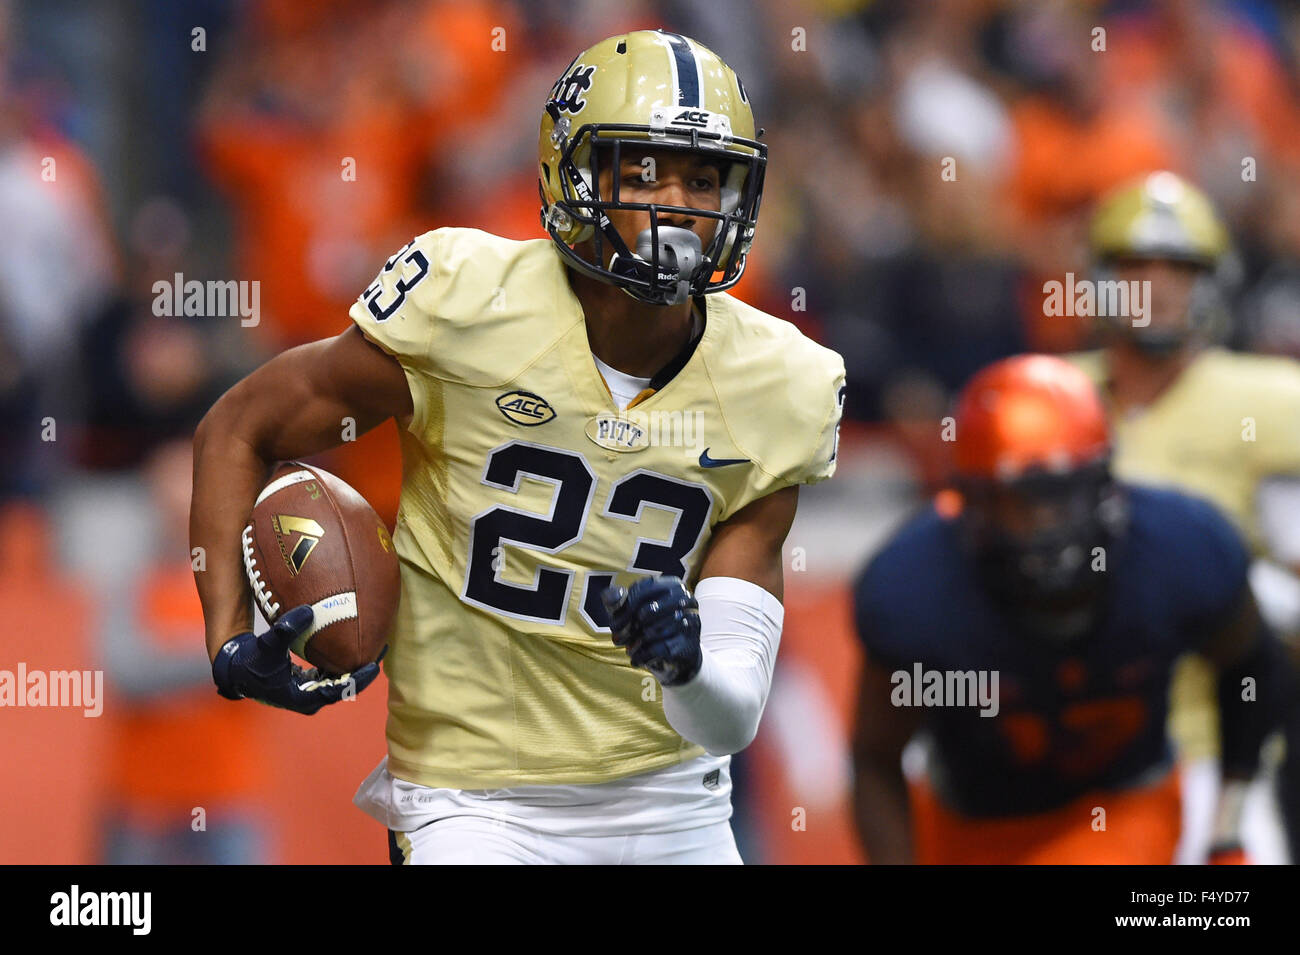 Syracuse, New York, USA. 24th Oct, 2015. Pittsburgh Panthers wide receiver Tyler Boyd (23) runs with the ball against the Syracuse Orange during the fourth quarter of an NCAA football game on Saturday, October 24, 2015, at the Carrier Dome in Syracuse, New York. Pittsburgh won the game 23-20. Rich Barnes/CSM/Alamy Live News Stock Photo